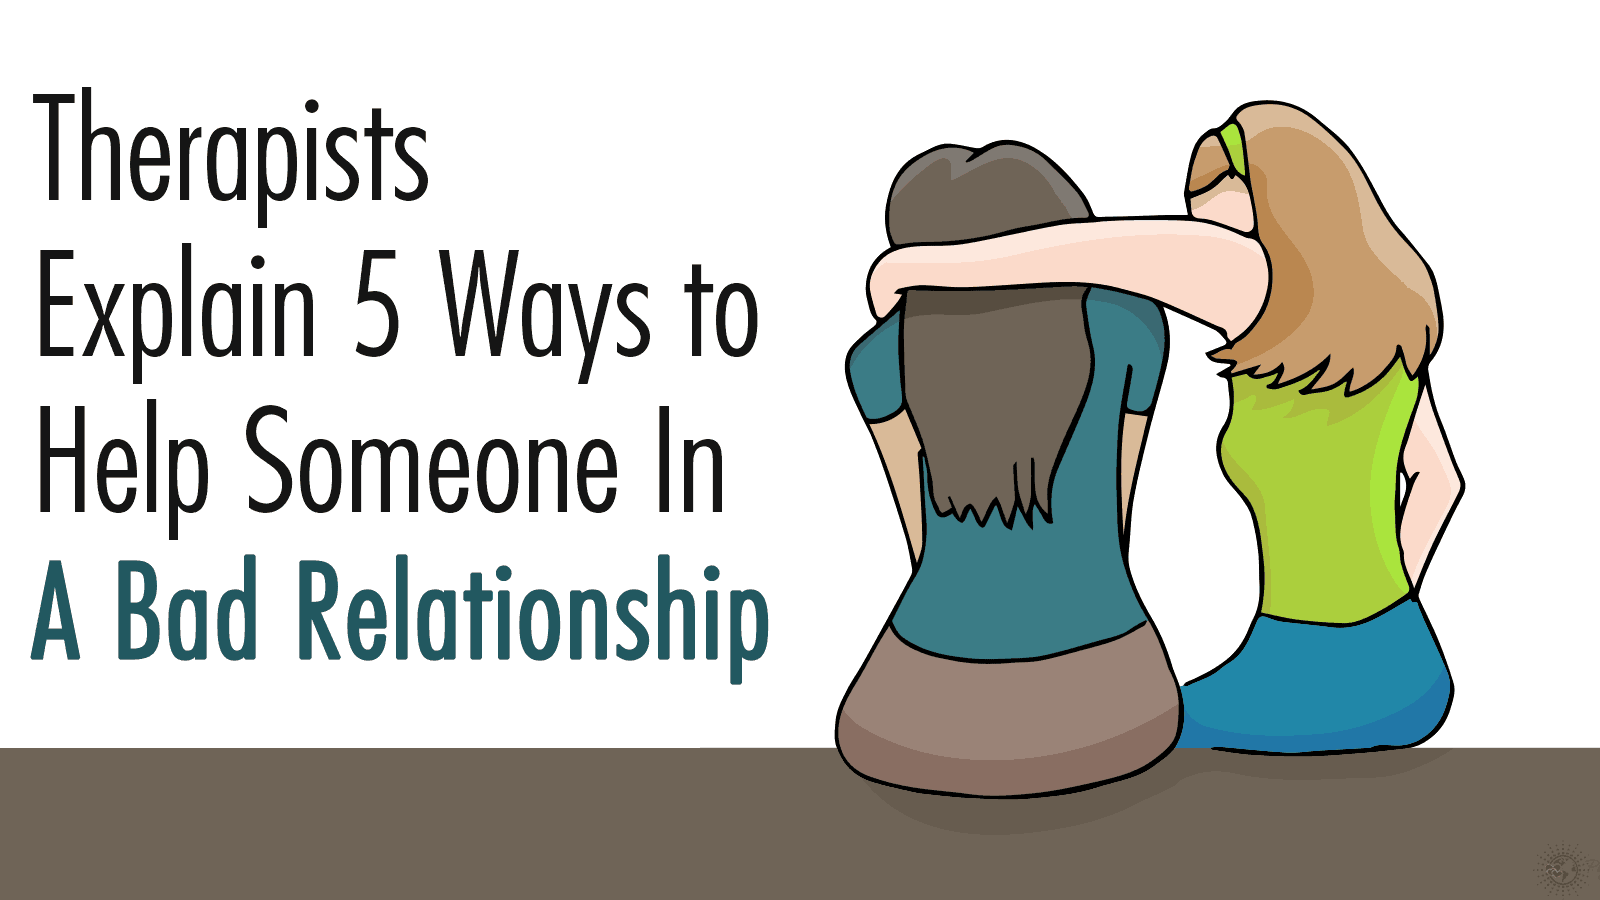 Therapists Explain 5 Ways to Help Someone In A Bad Relationship